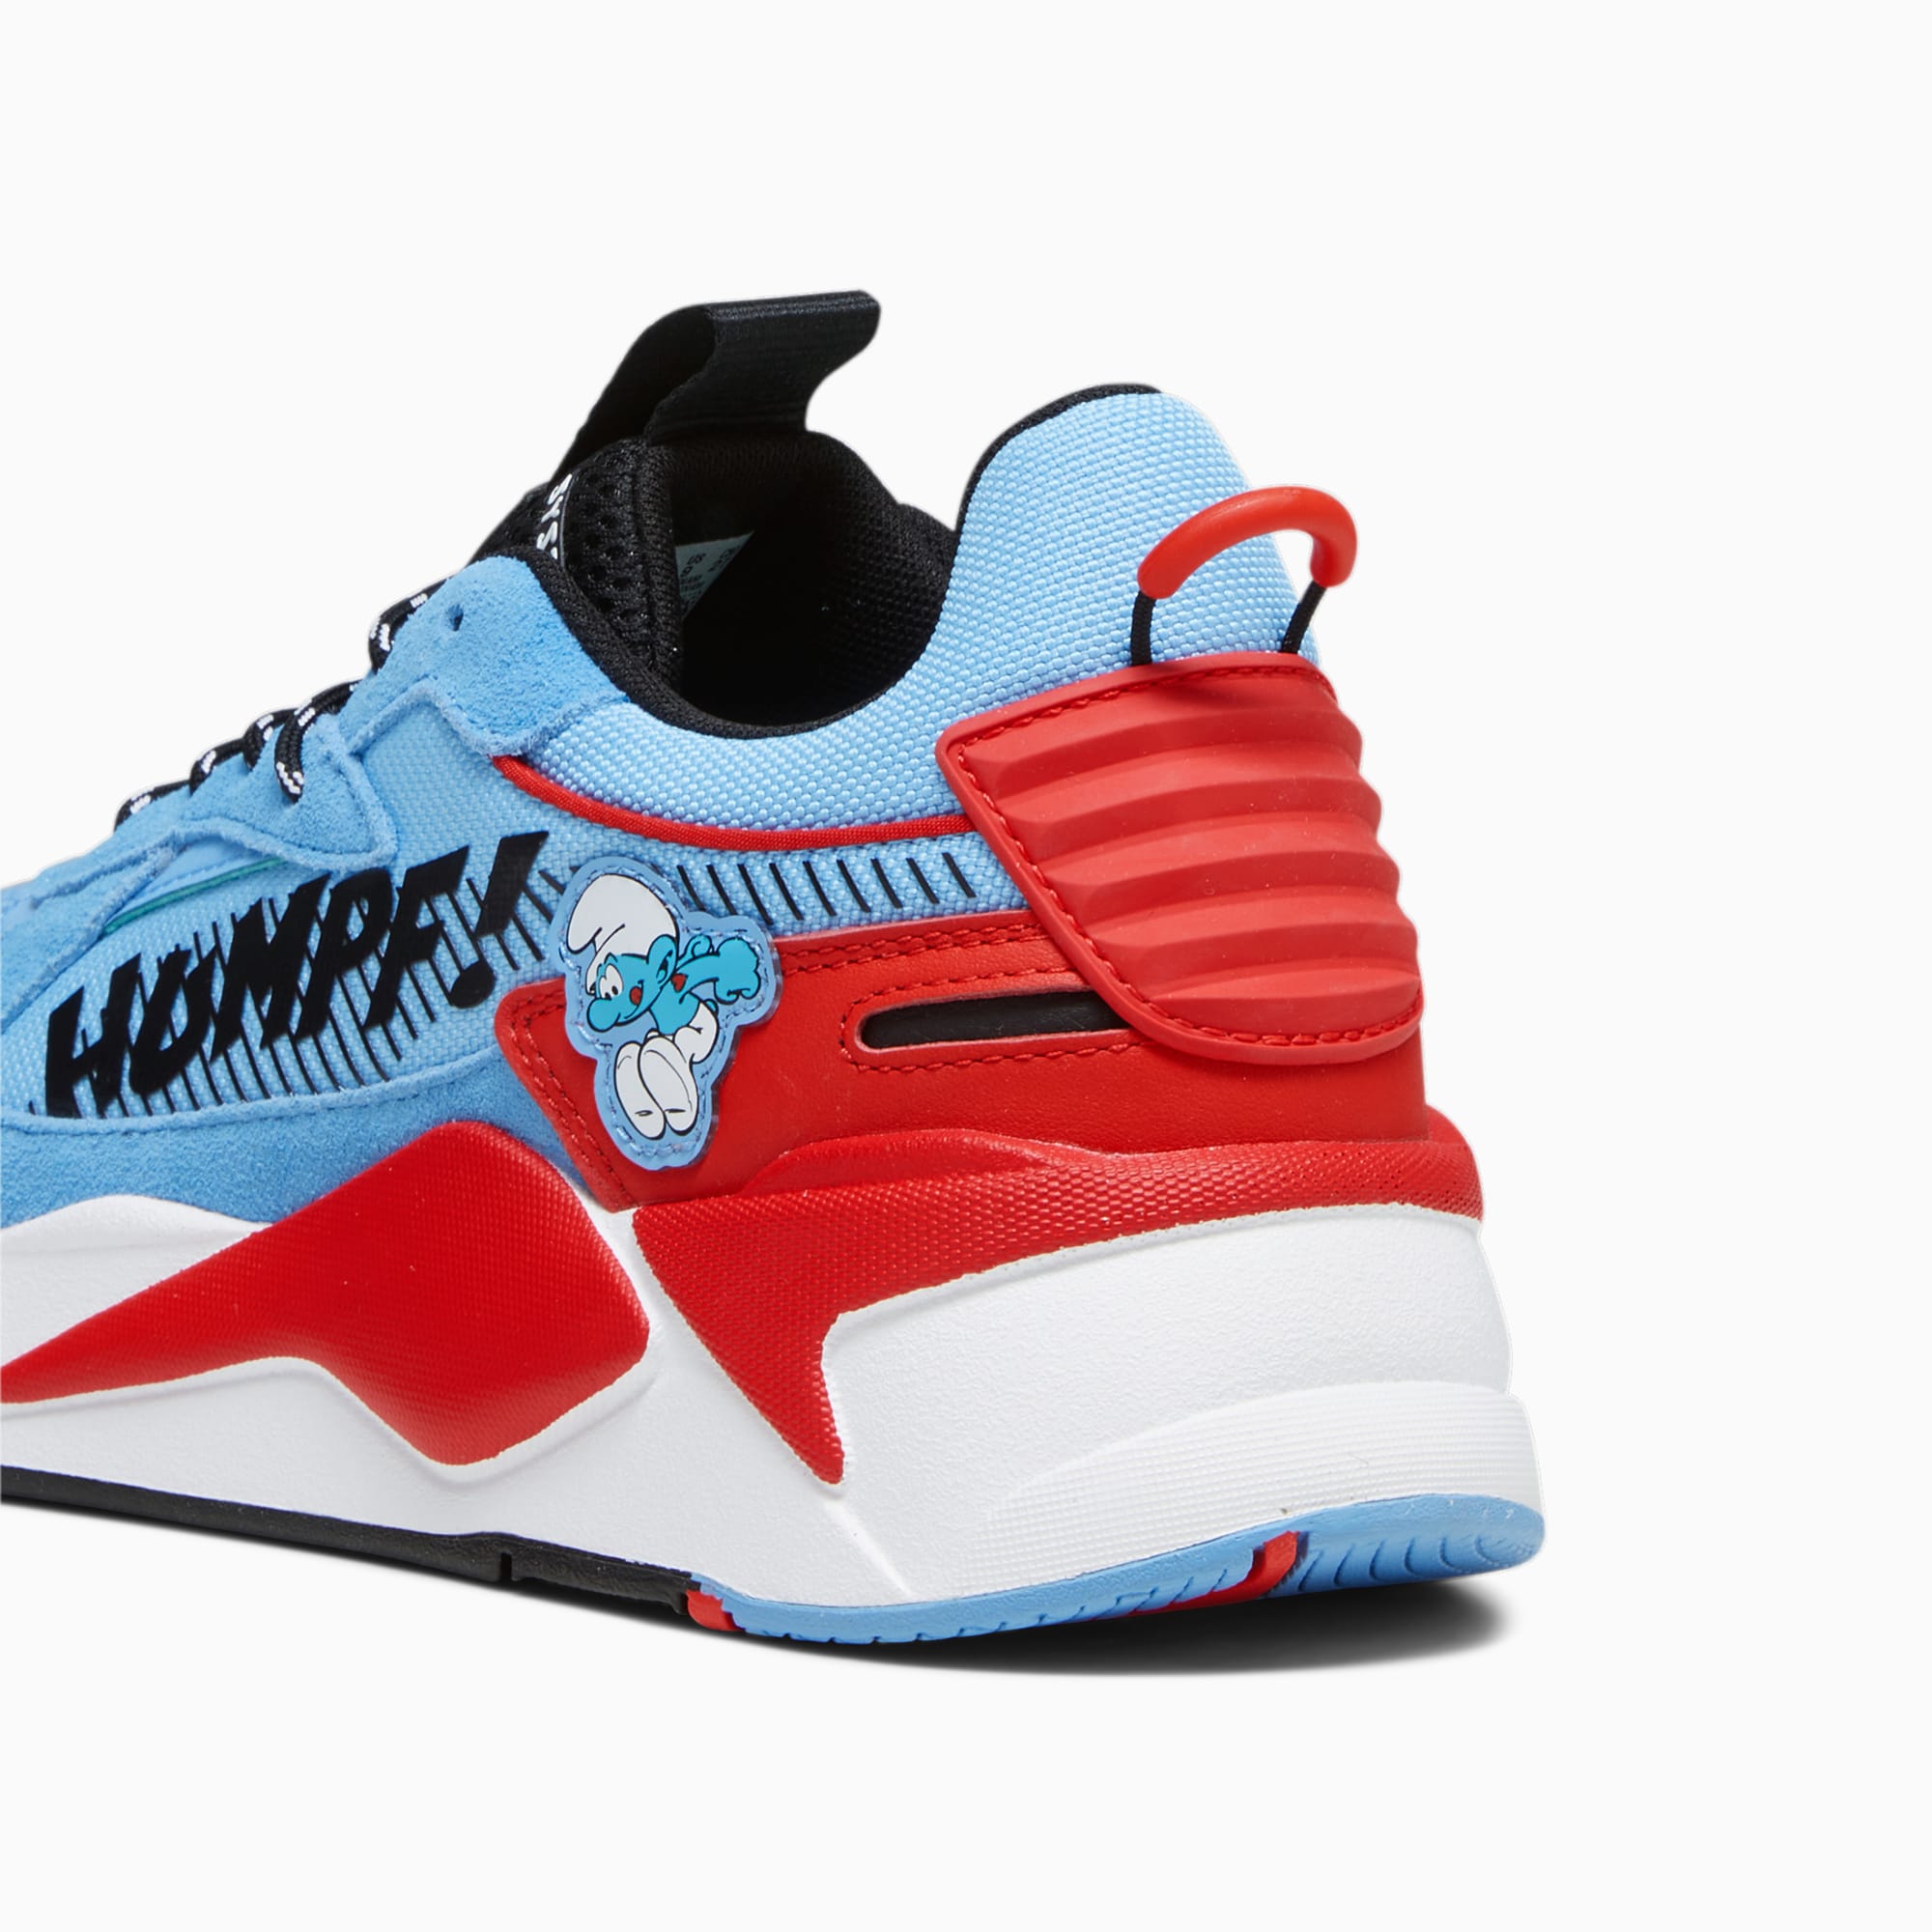 Women's PUMA X The Smurfs Rs-x Sneakers, Light Blue/Red, Size 35,5, Shoes